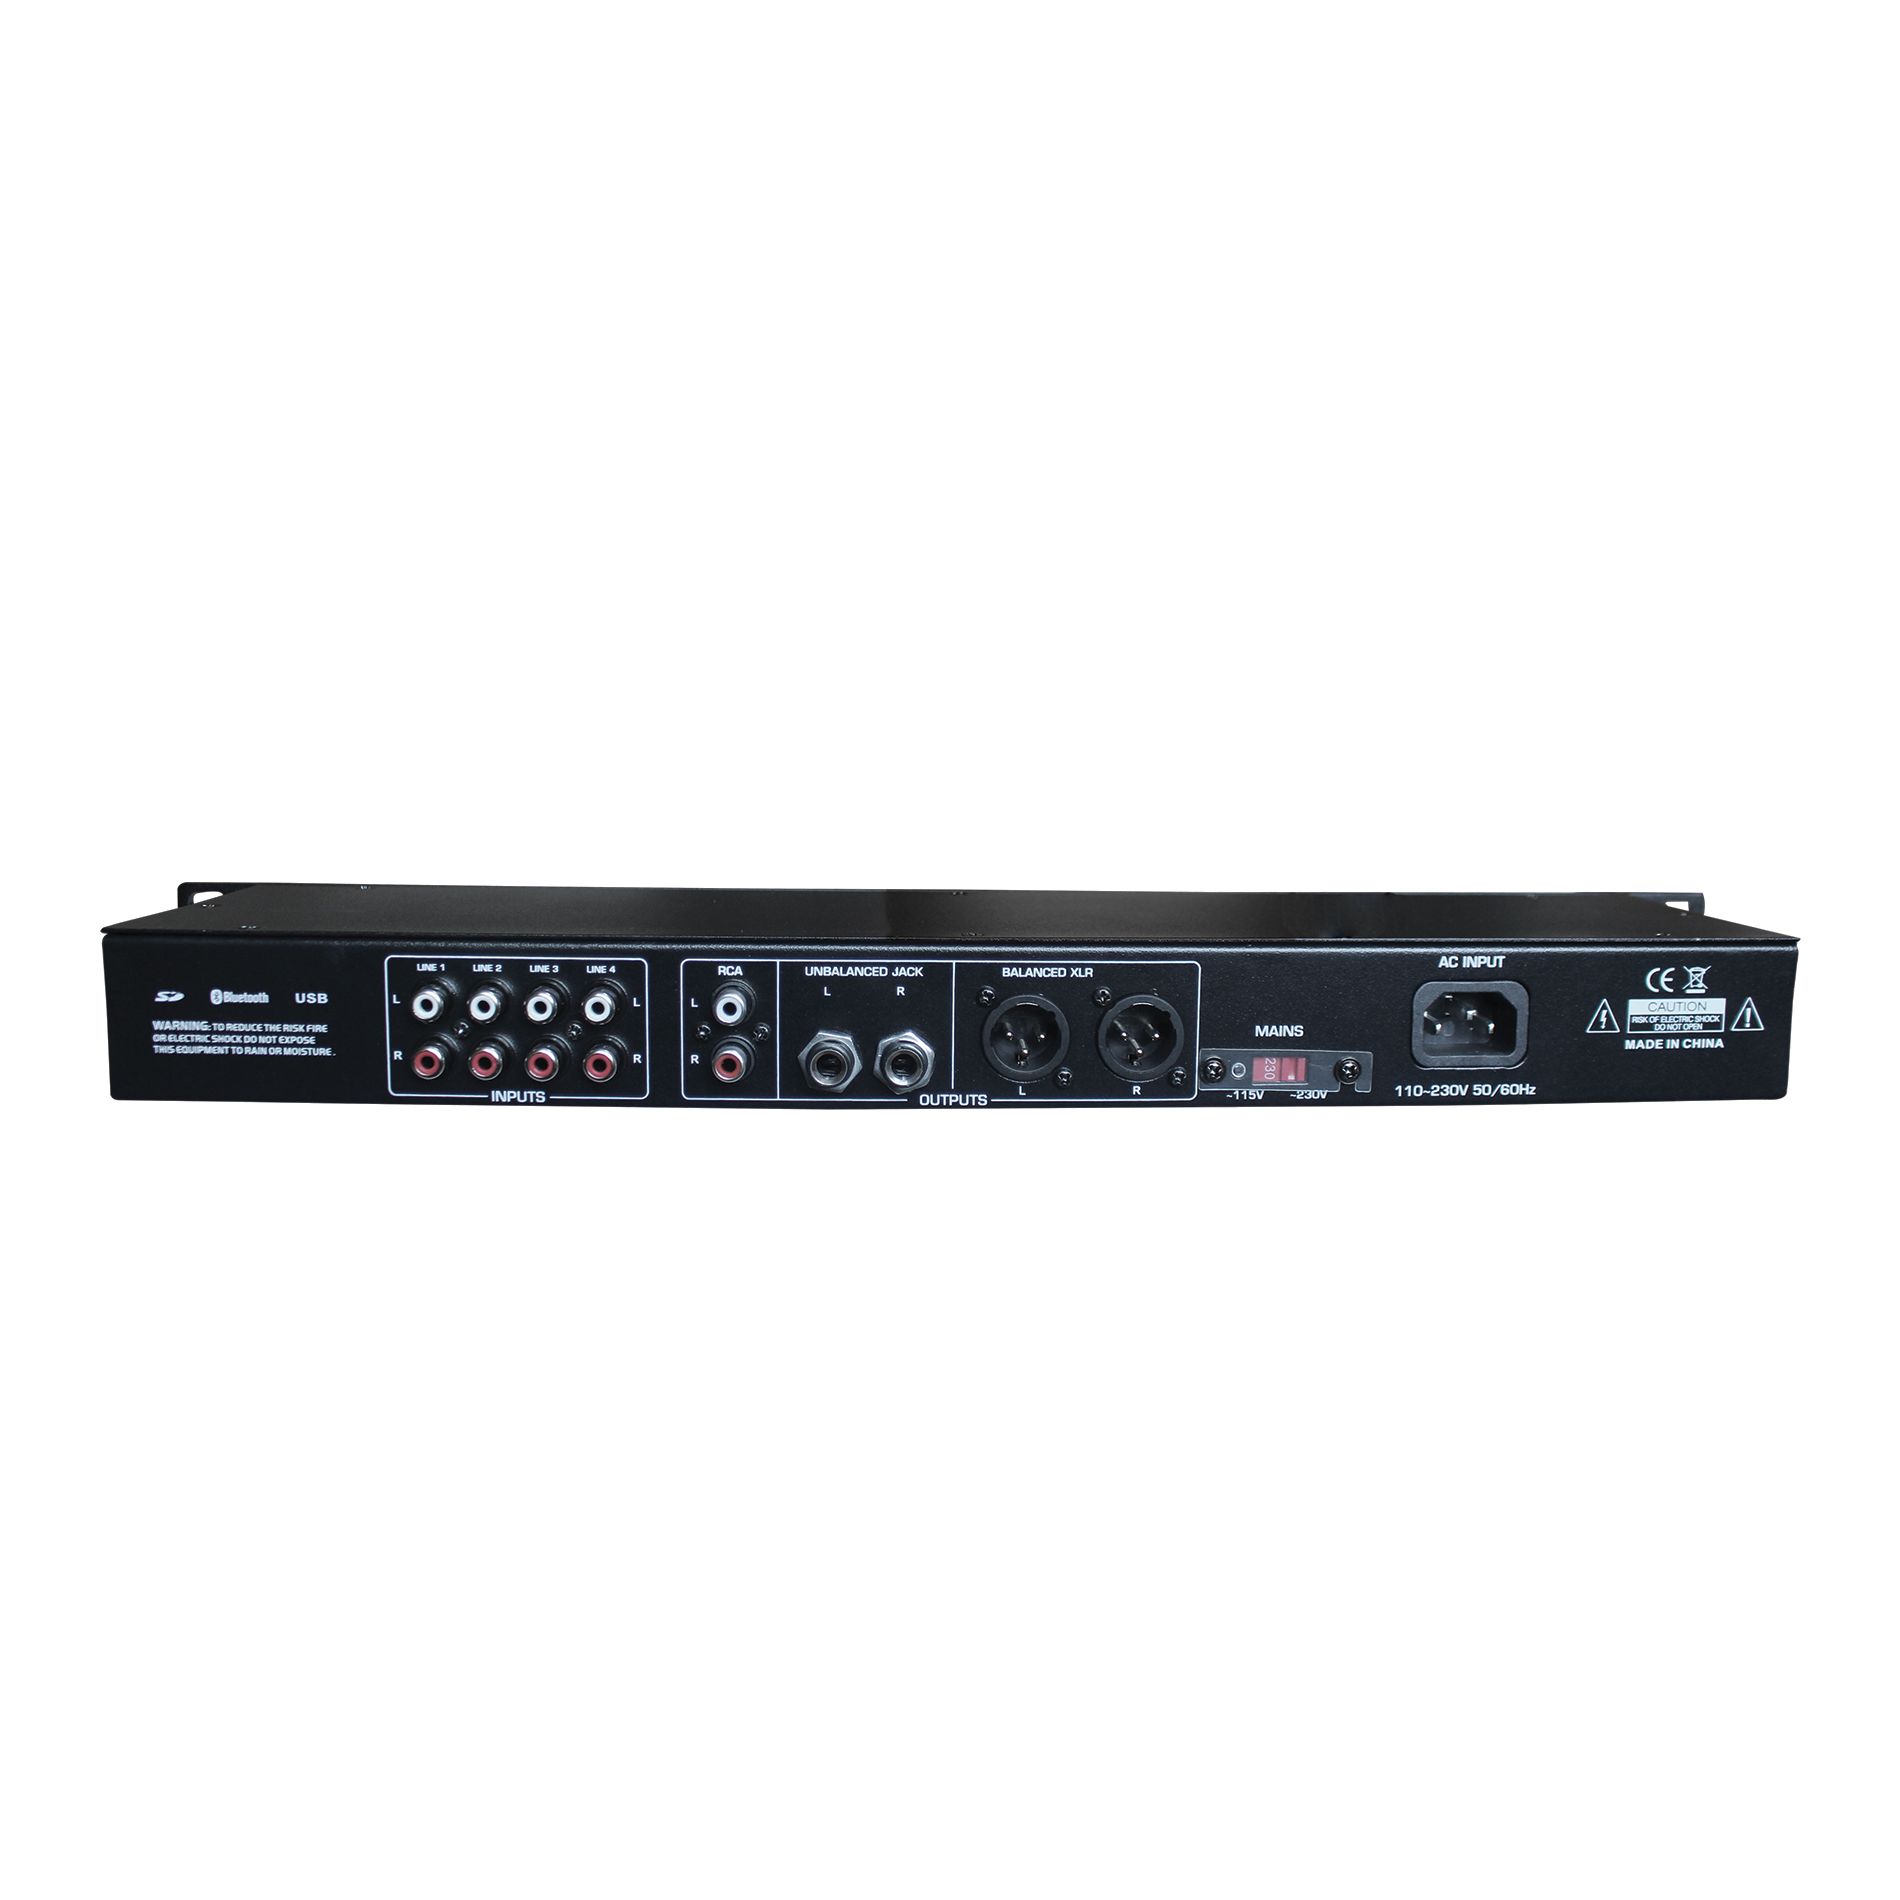 Definitive Audio Media Player One - CD recorder in rack - Variation 2